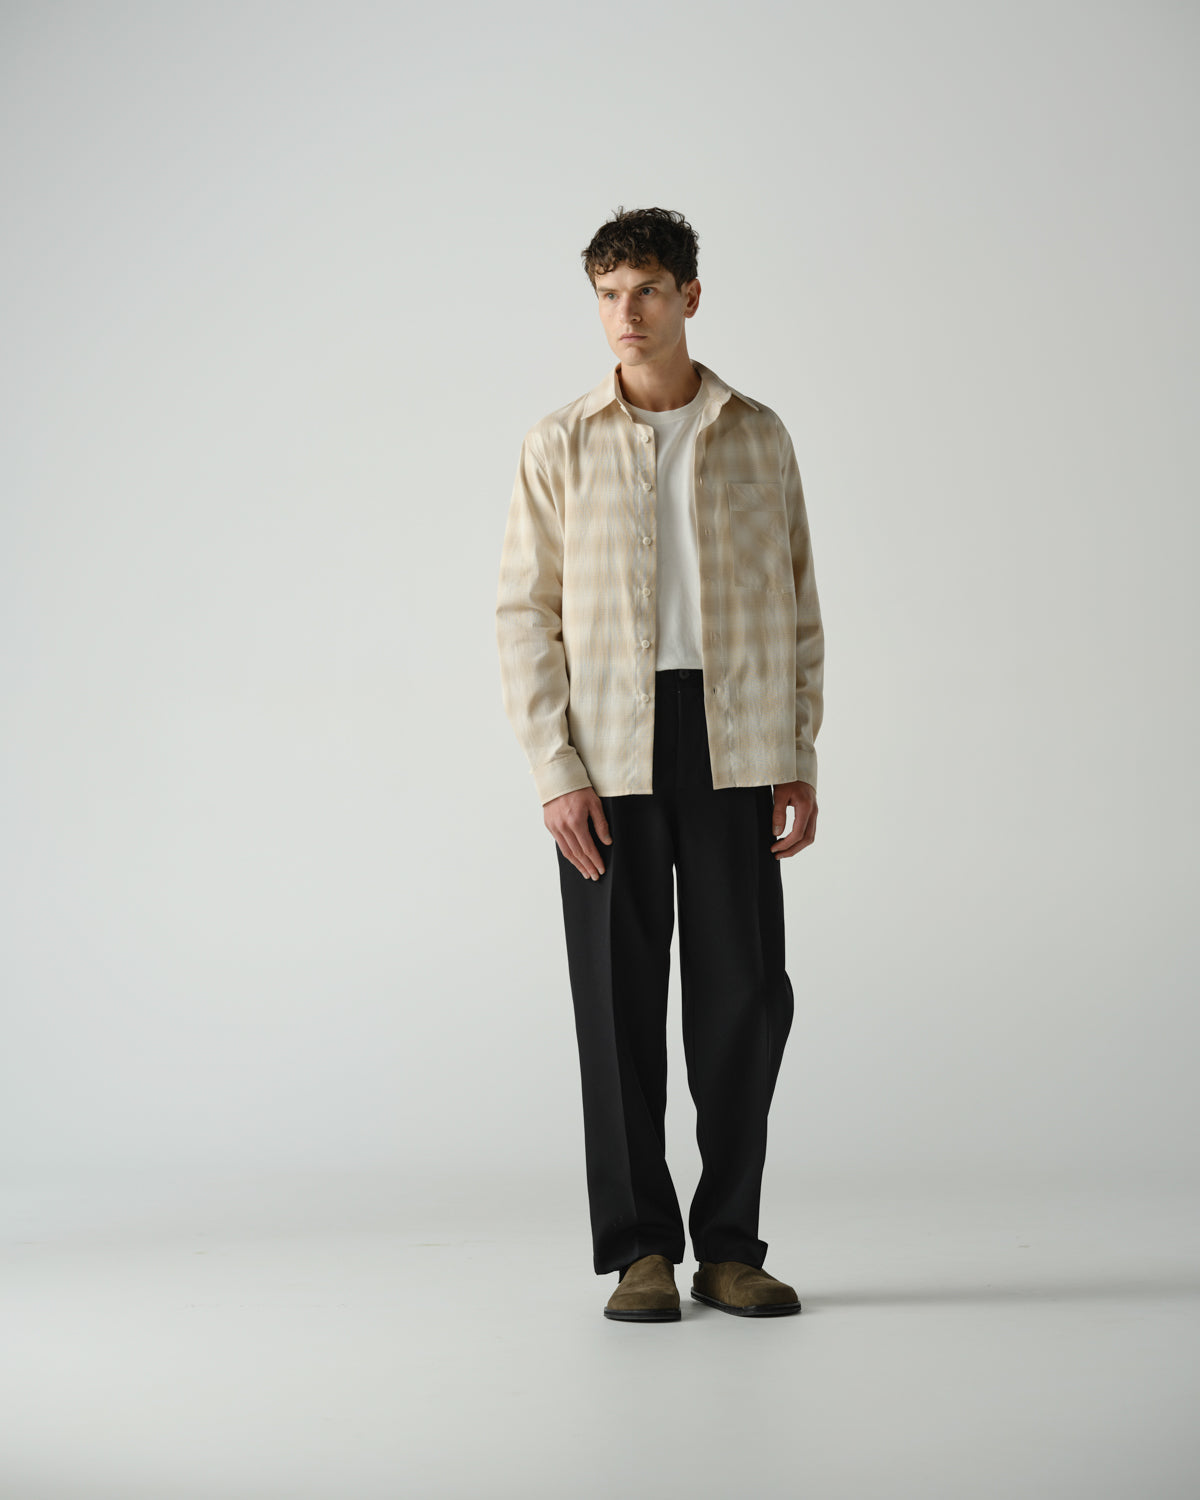 Male model in beige and check long sleeve shirt